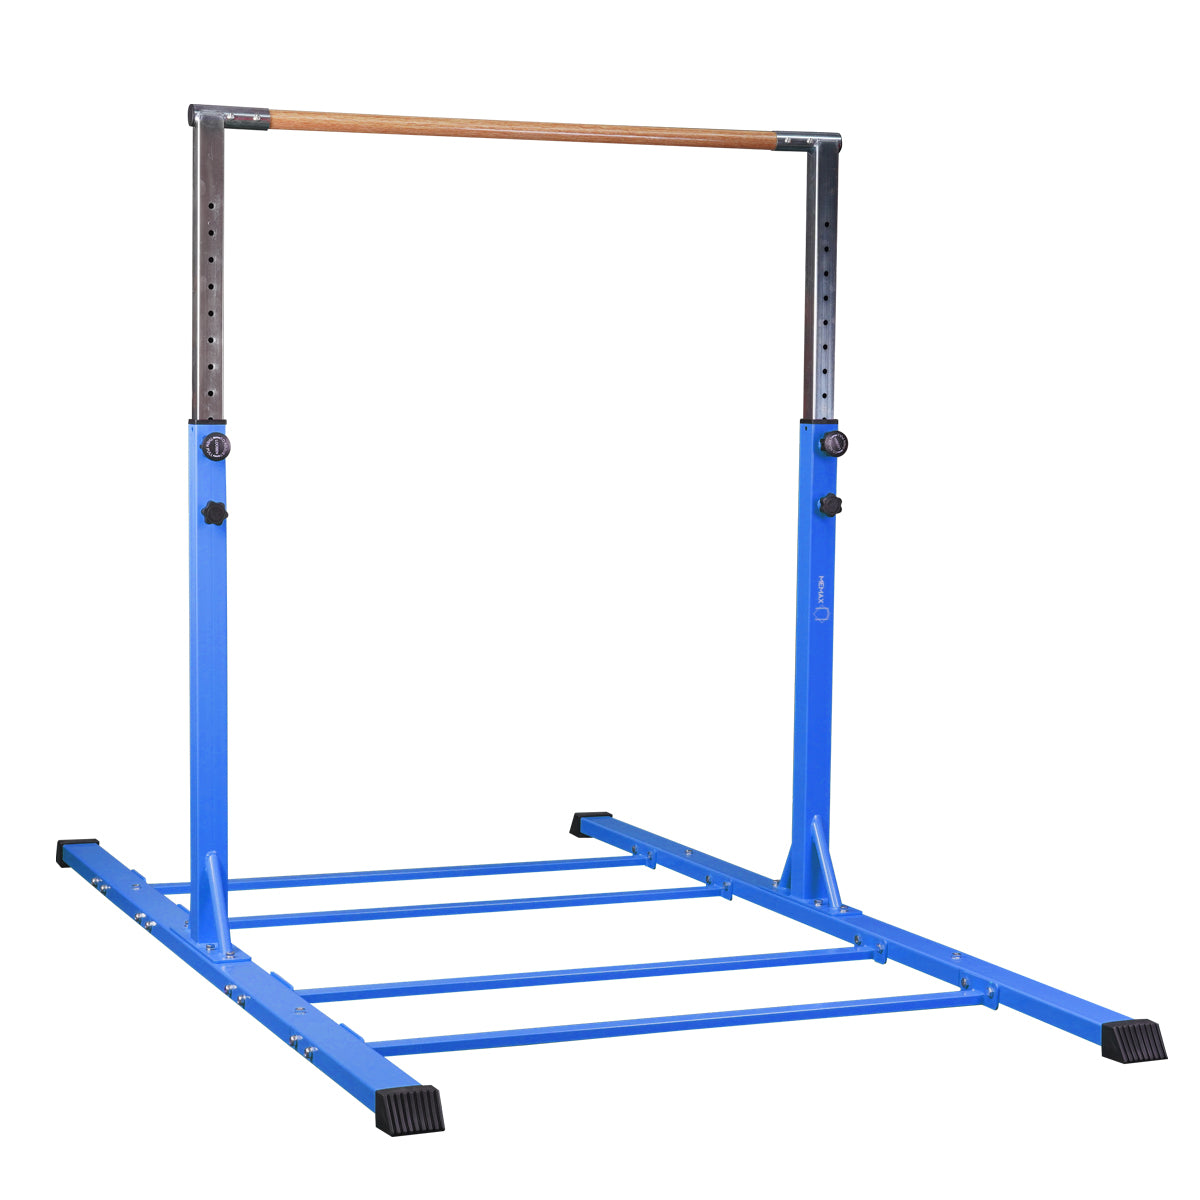 Gymnastics High Bar and Mat Combo for Kids - Extra Stable